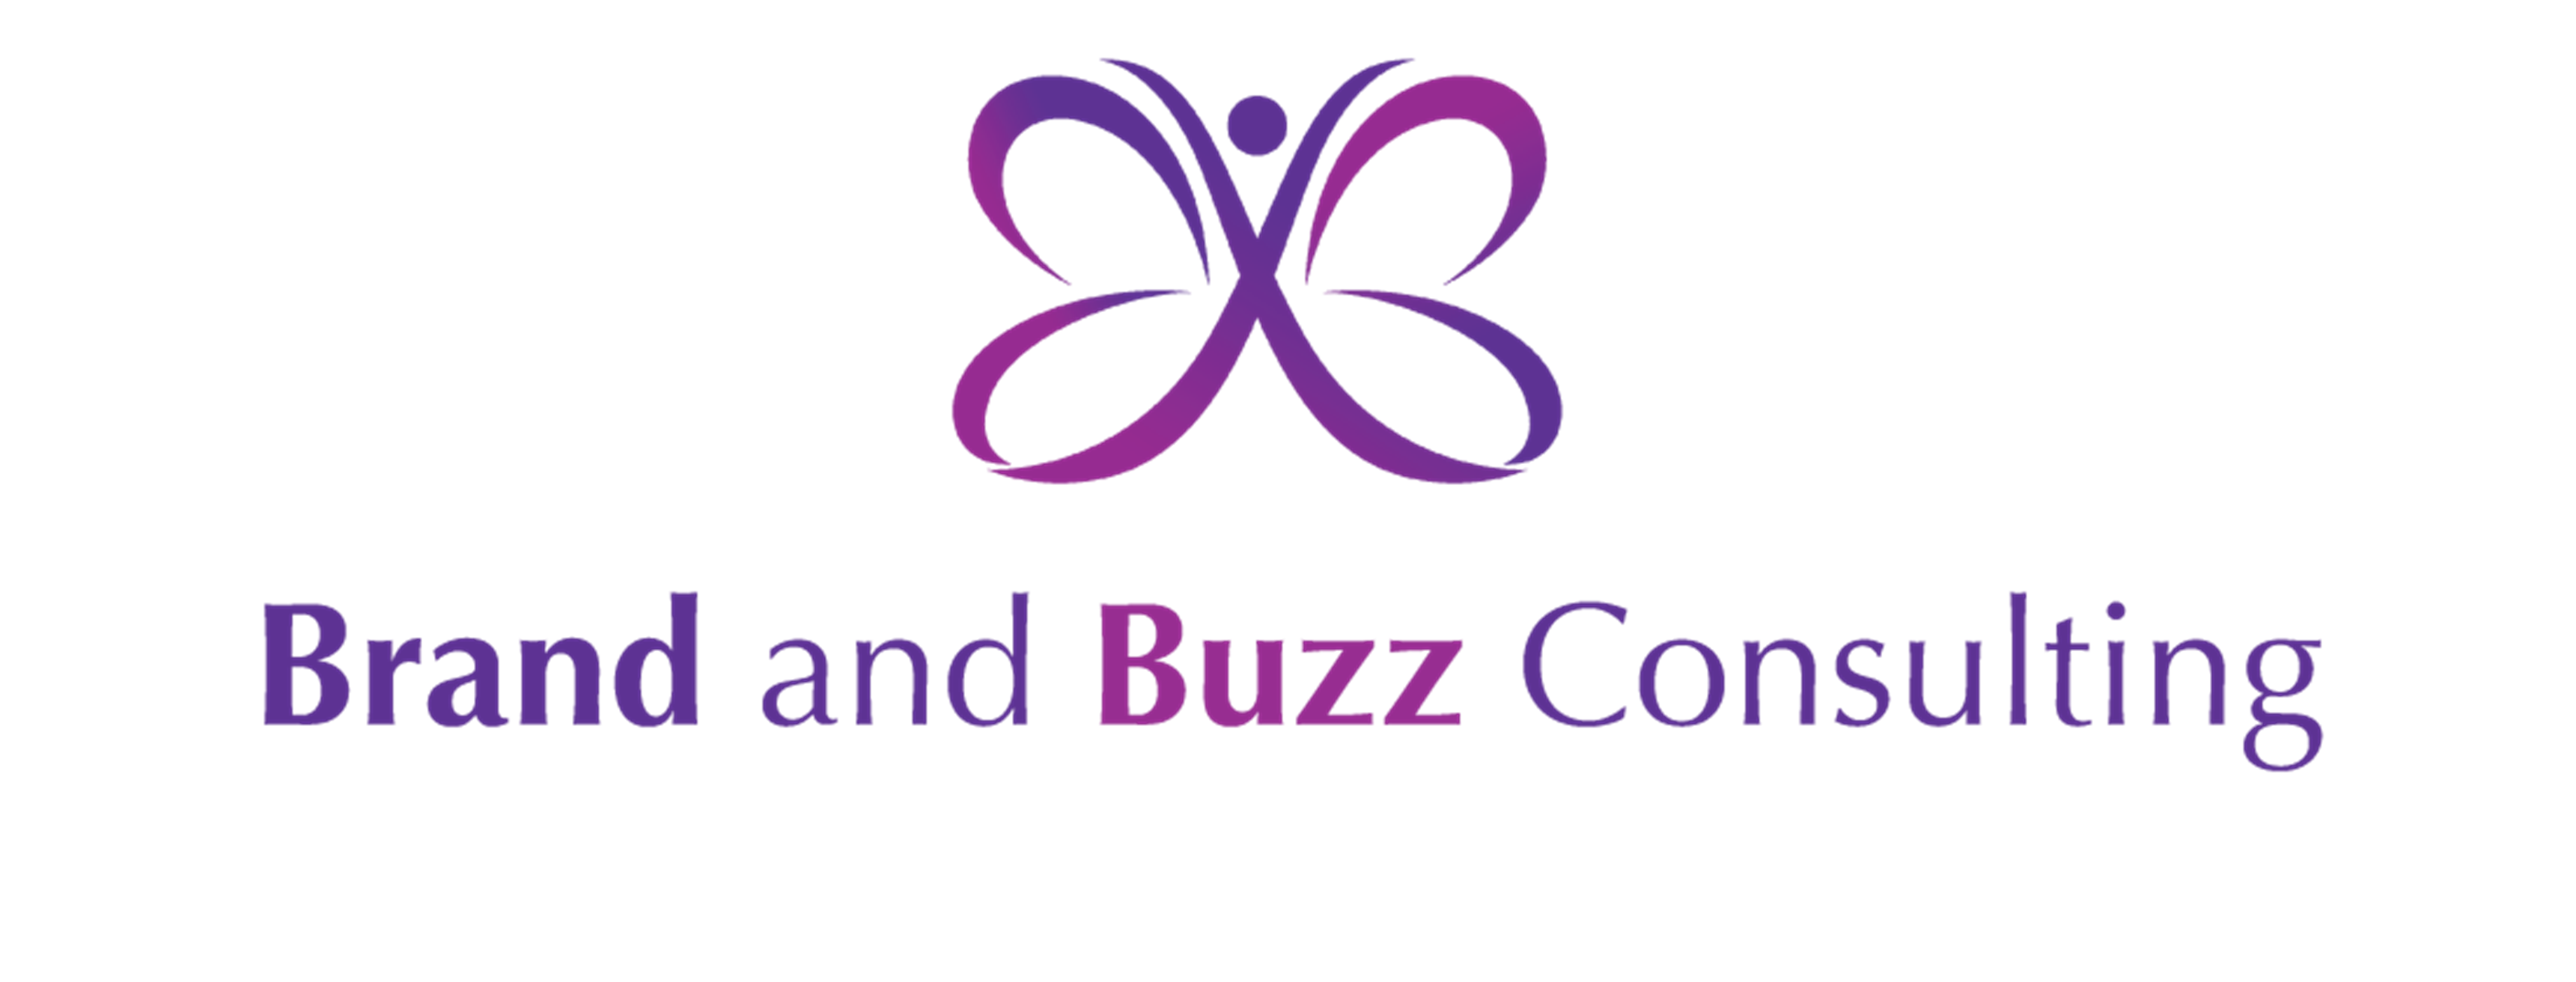 Brand and Buzz Consulting, LLC